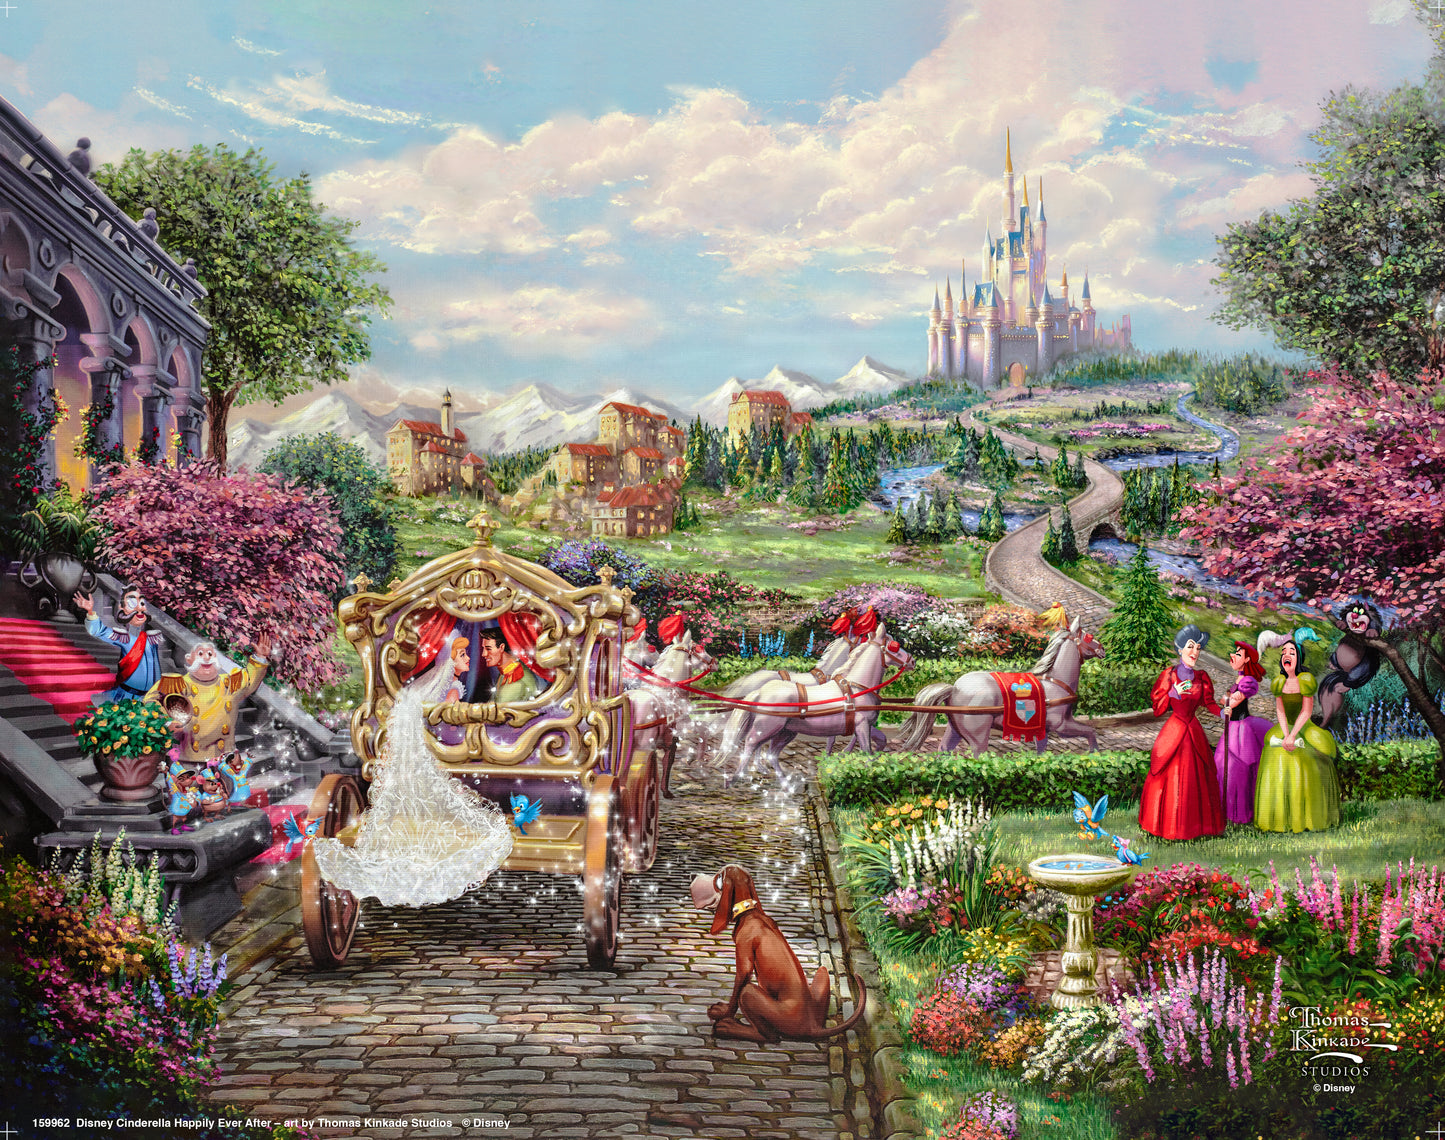 159962_f_11x14_Disney Cinderella Happily Ever After_GFT (NEW TEMPLATE) (1).jpg